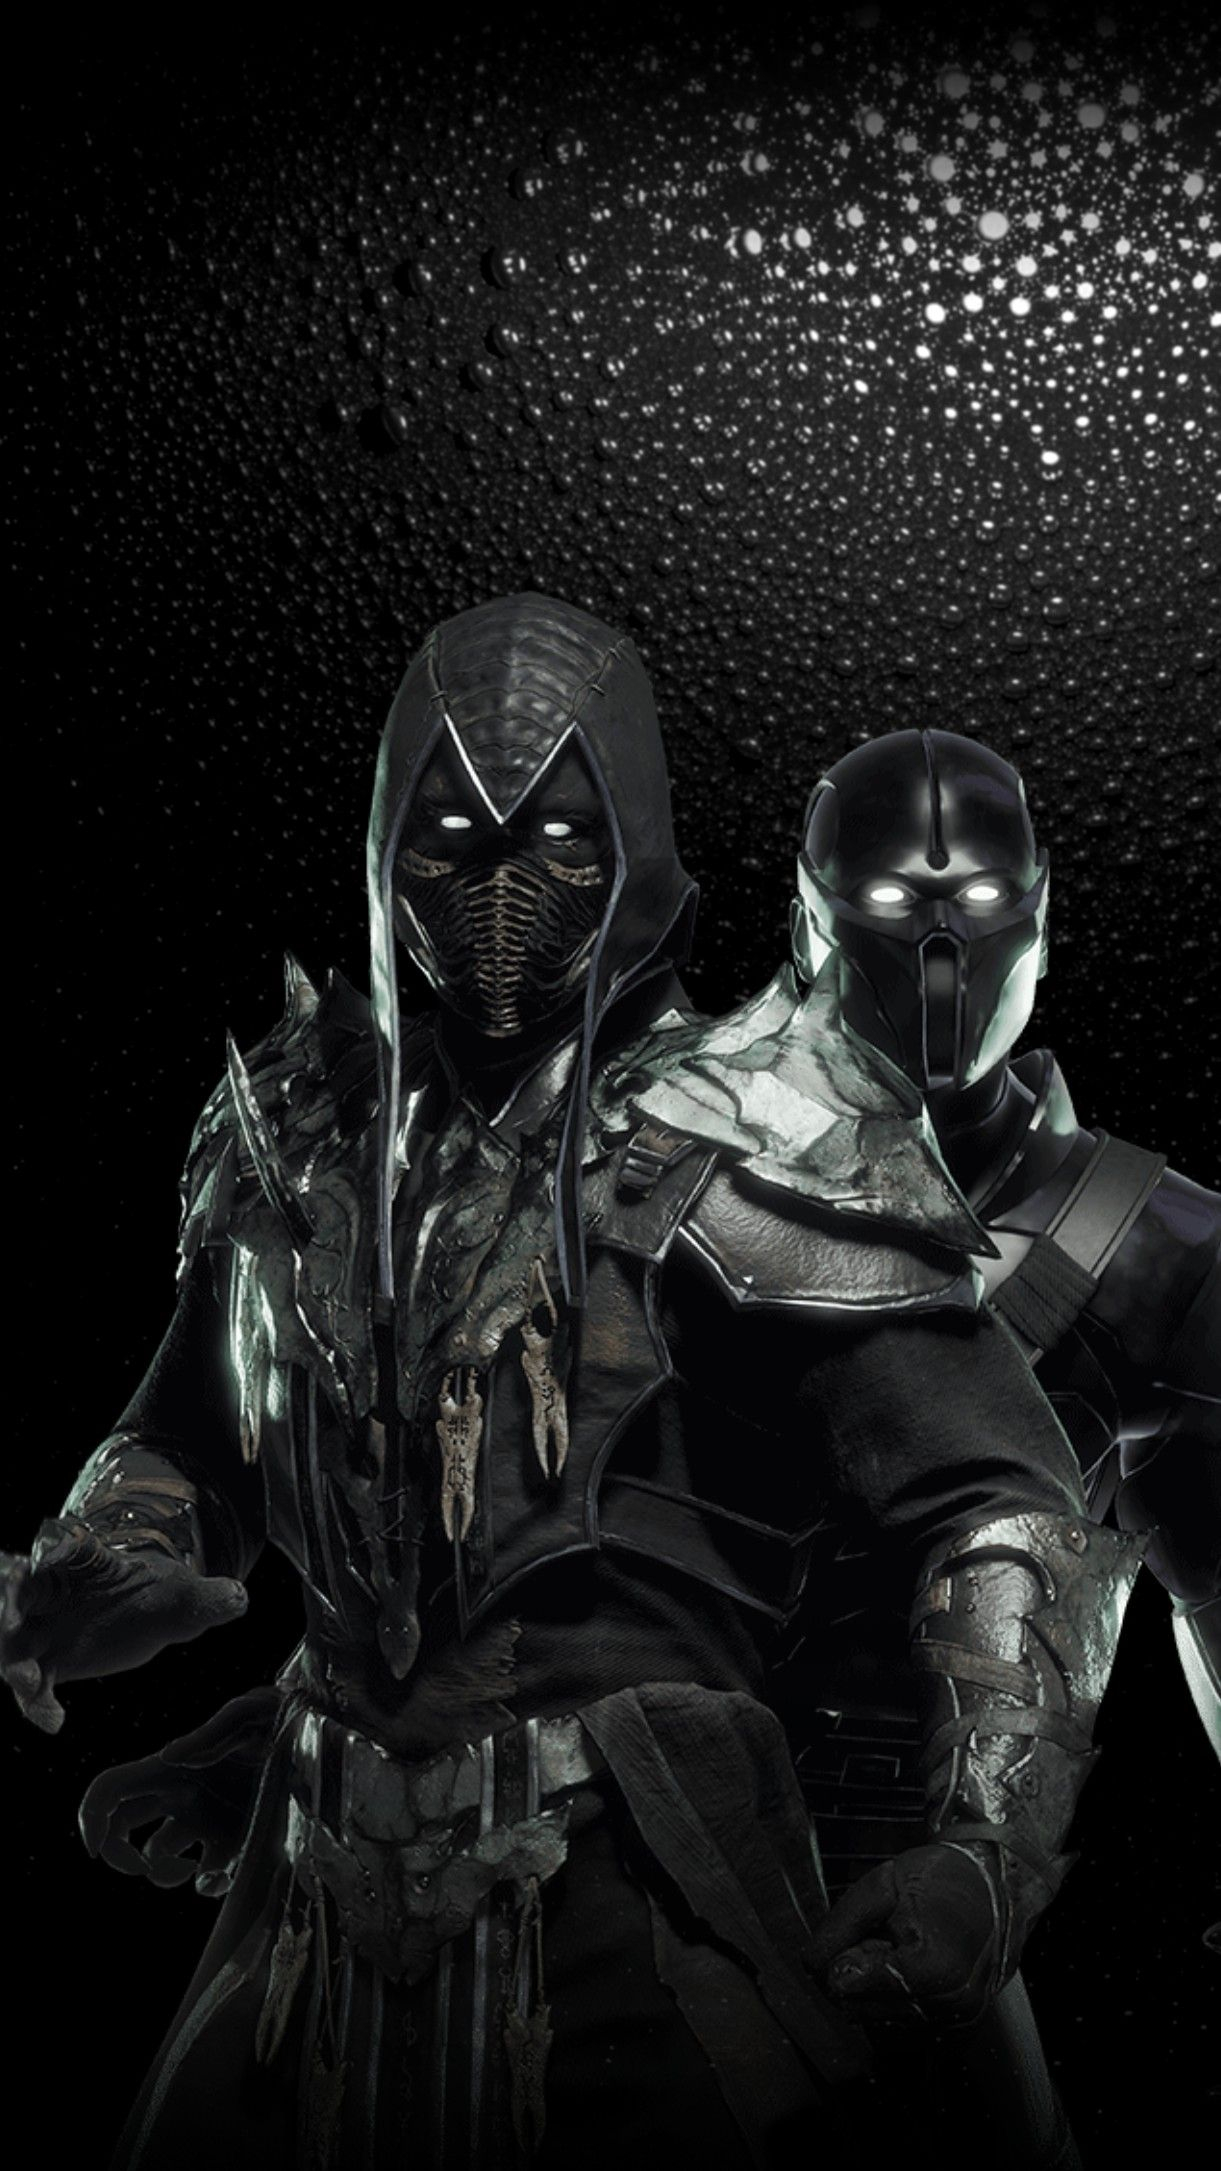 1221x2171 Noob Saibot Wallpapers For Android/IPhone | Noob saibot, Mortal kombat art, Mortal kombat x